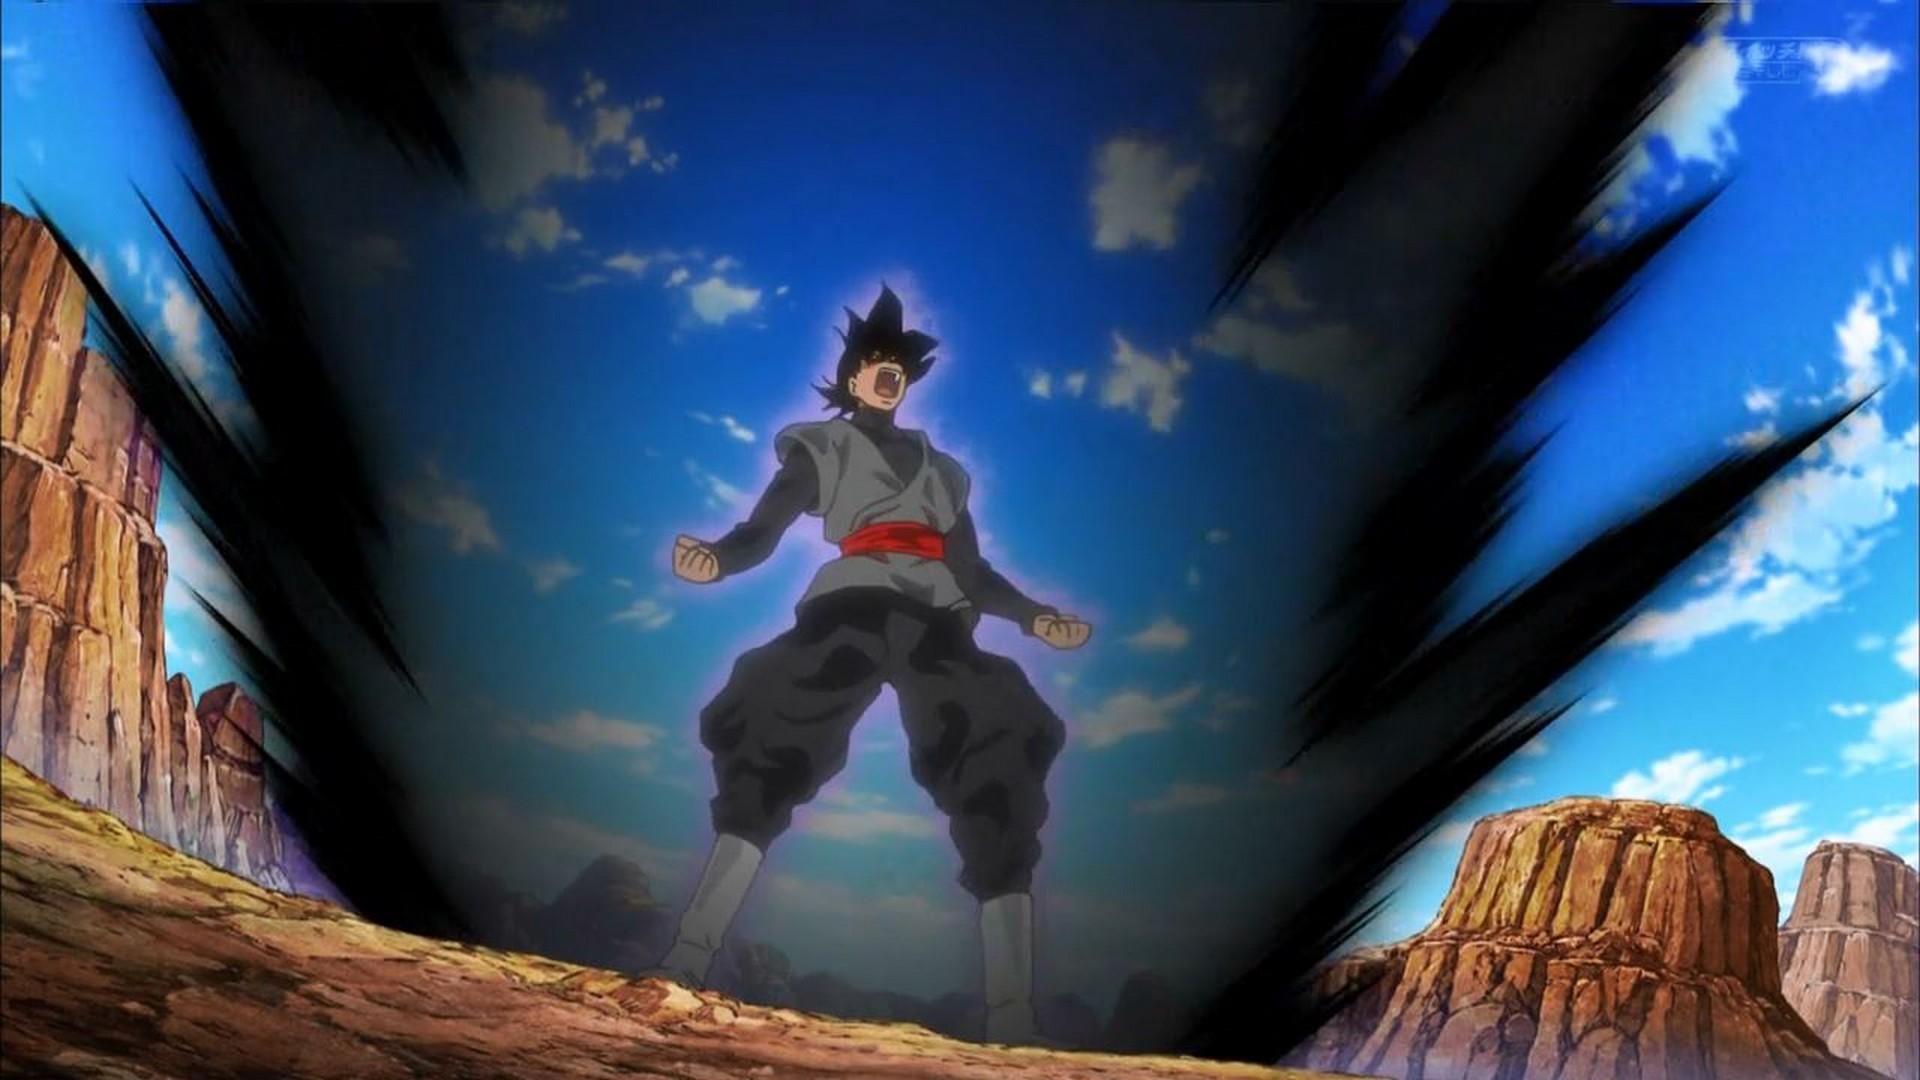 Black Goku Background Wallpaper HD With Resolution 1920X1080 pixel. You can make this wallpaper for your Desktop Computer Backgrounds, Mac Wallpapers, Android Lock screen or iPhone Screensavers